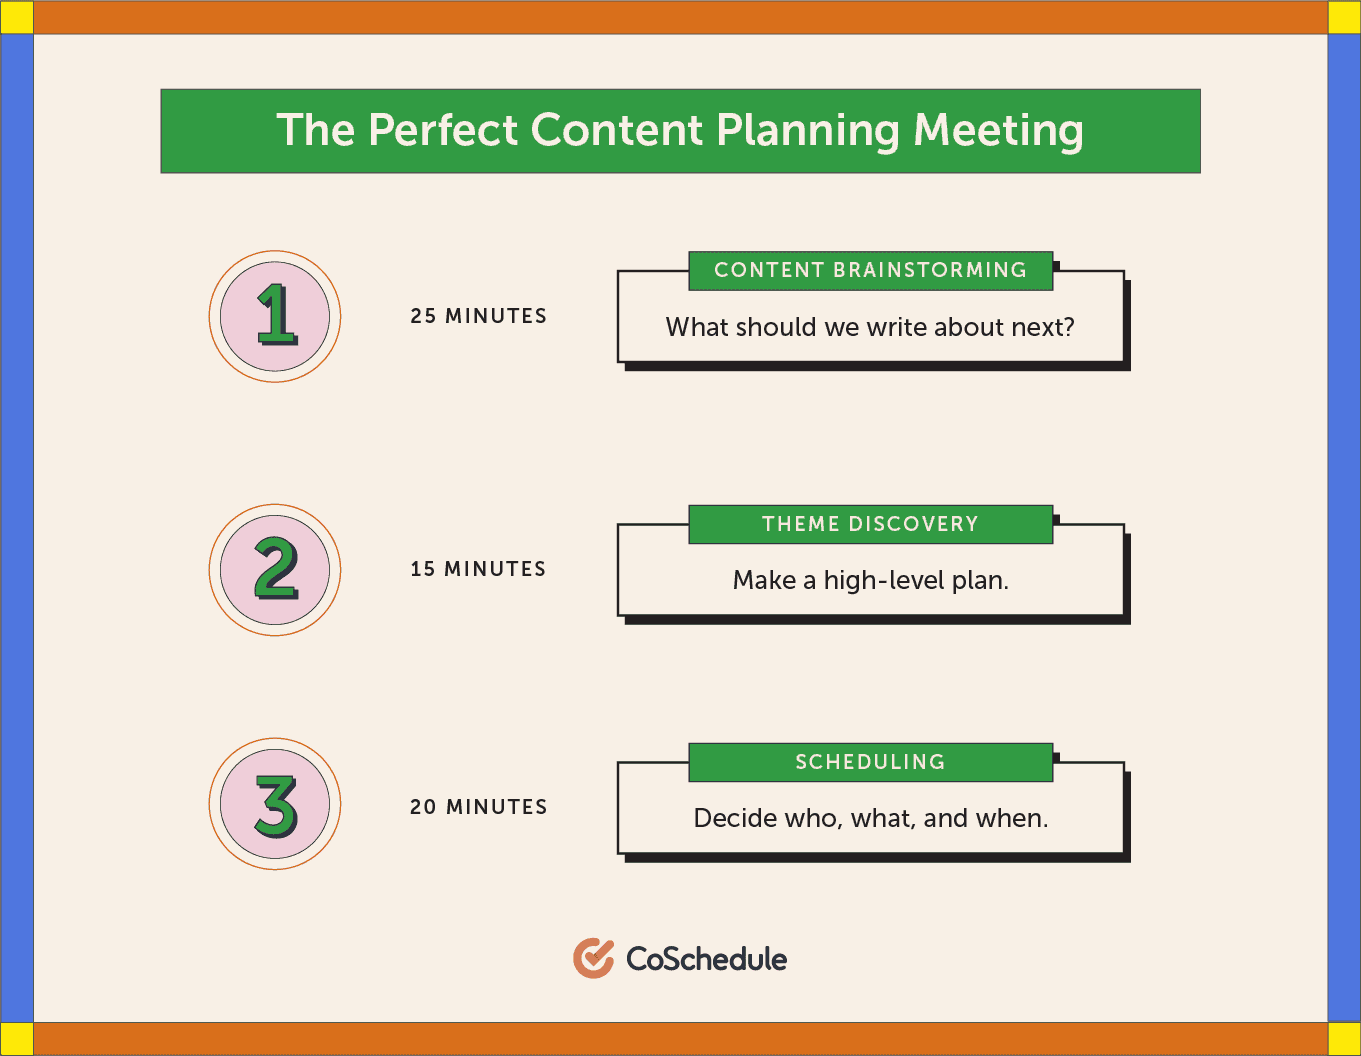 The perfect content planning meeting